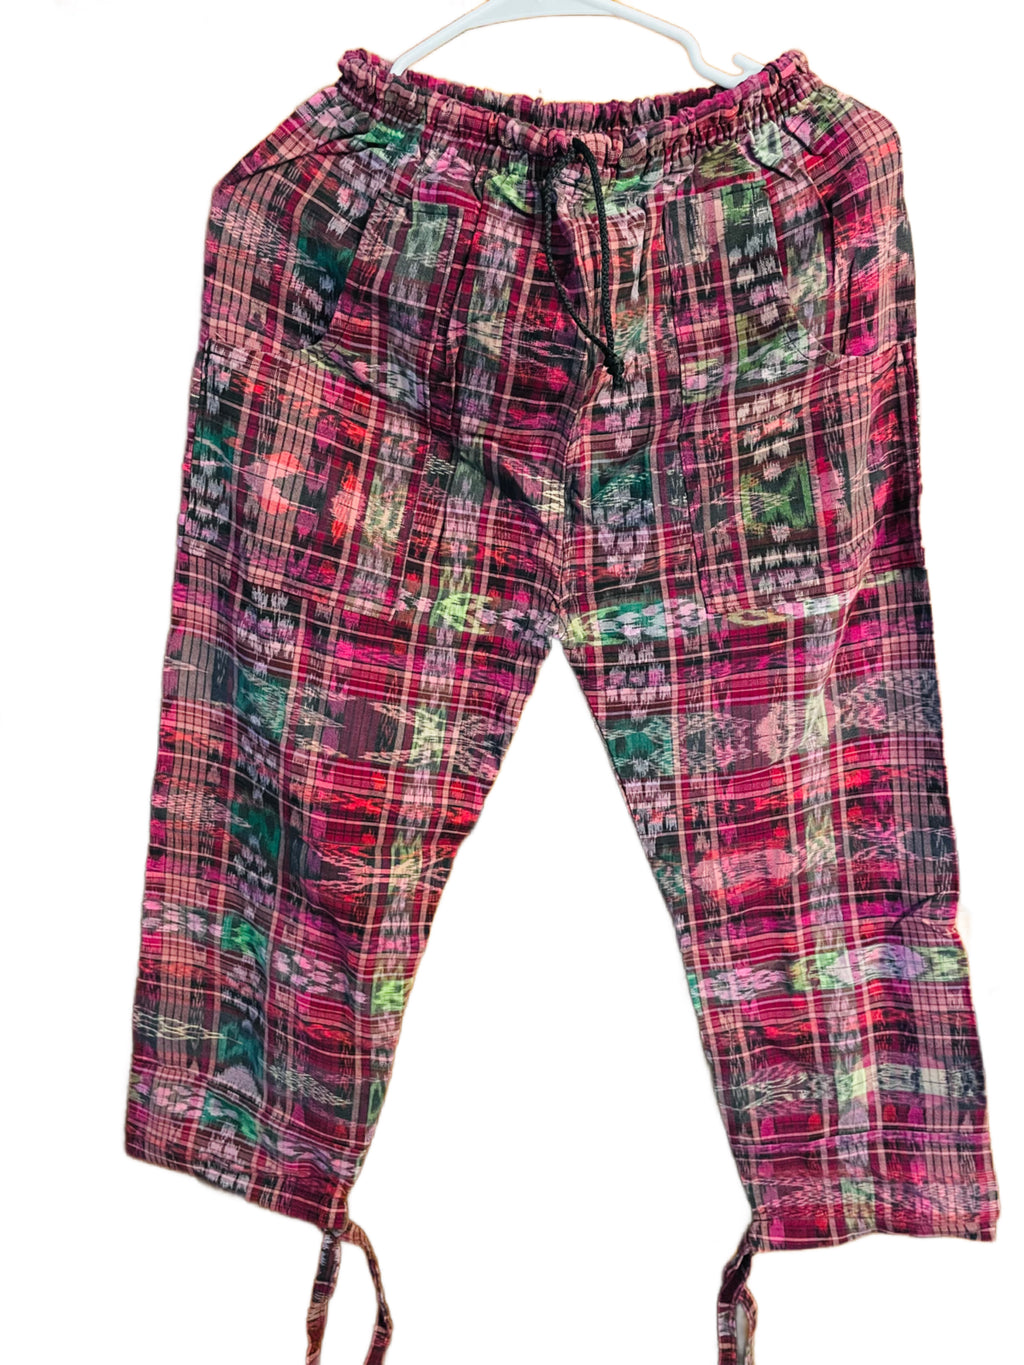 Unisex Adult Pants- Pink/ Green Multicolor